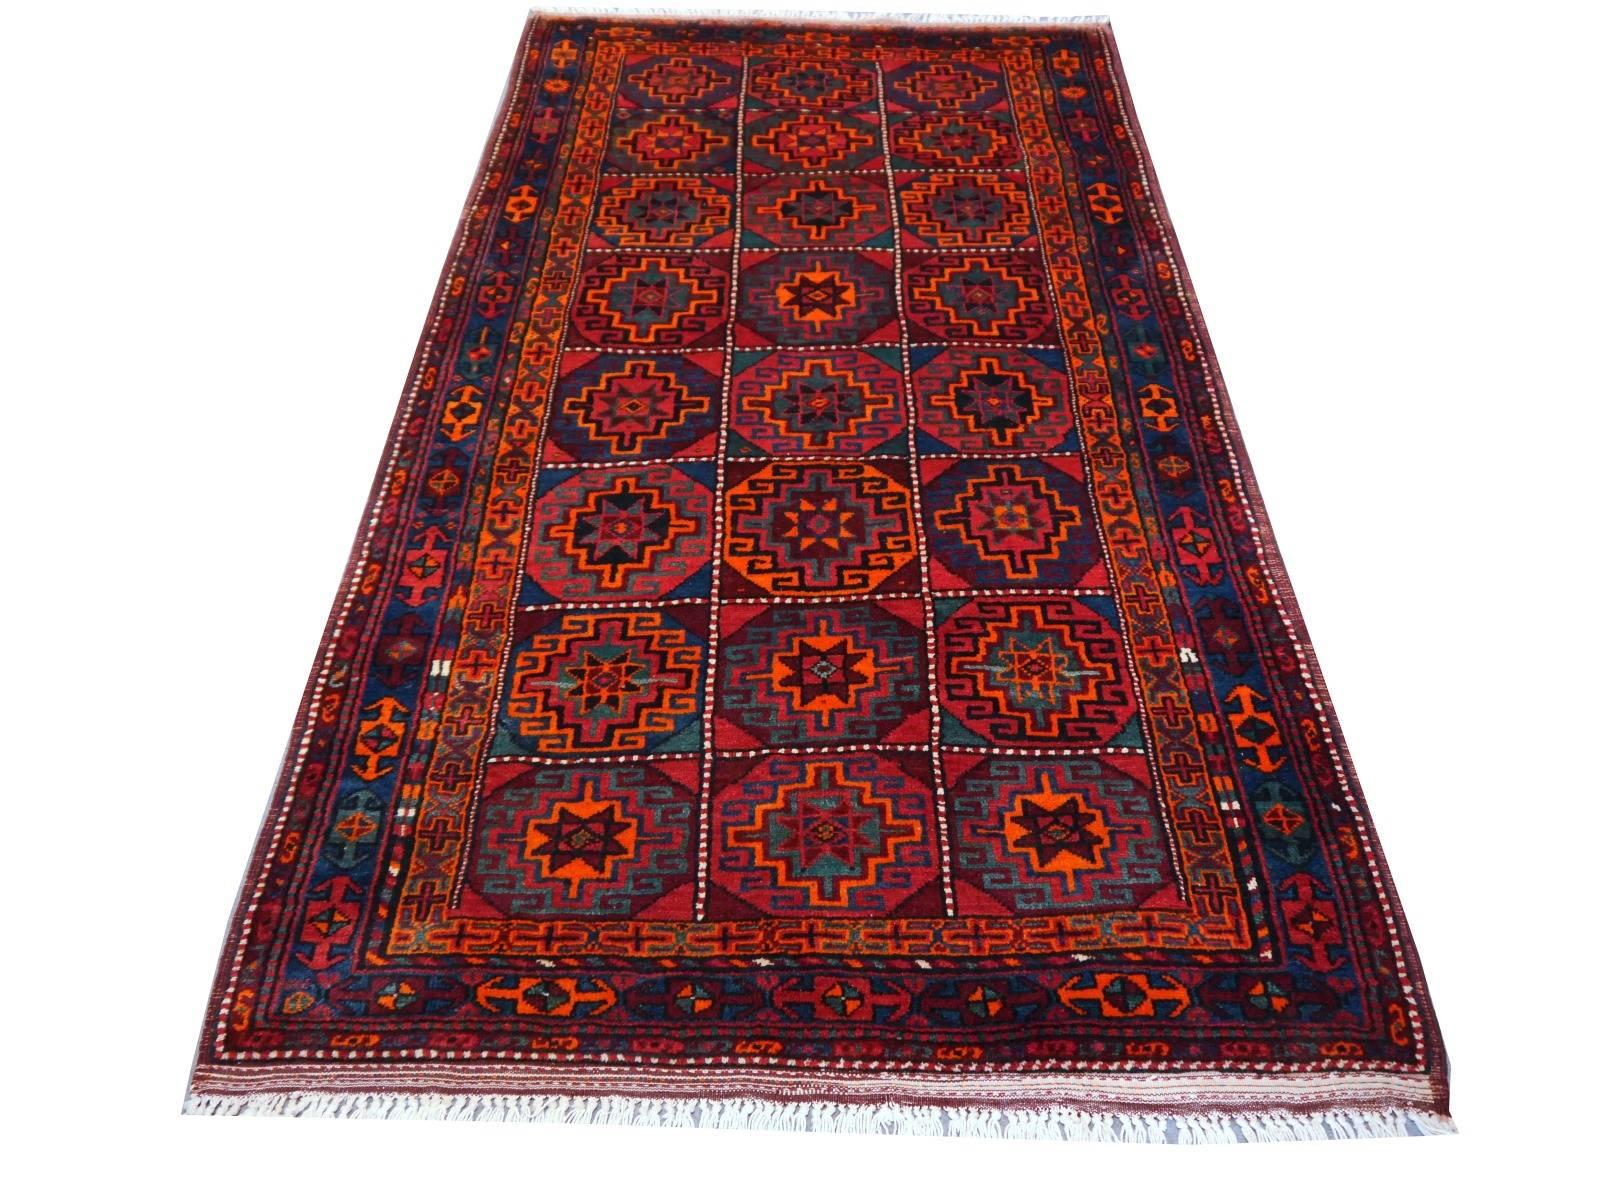 Rare and colorful vintage Kordish rug with natural dyes. Very good condition, shiny wool on Cotton foundation.